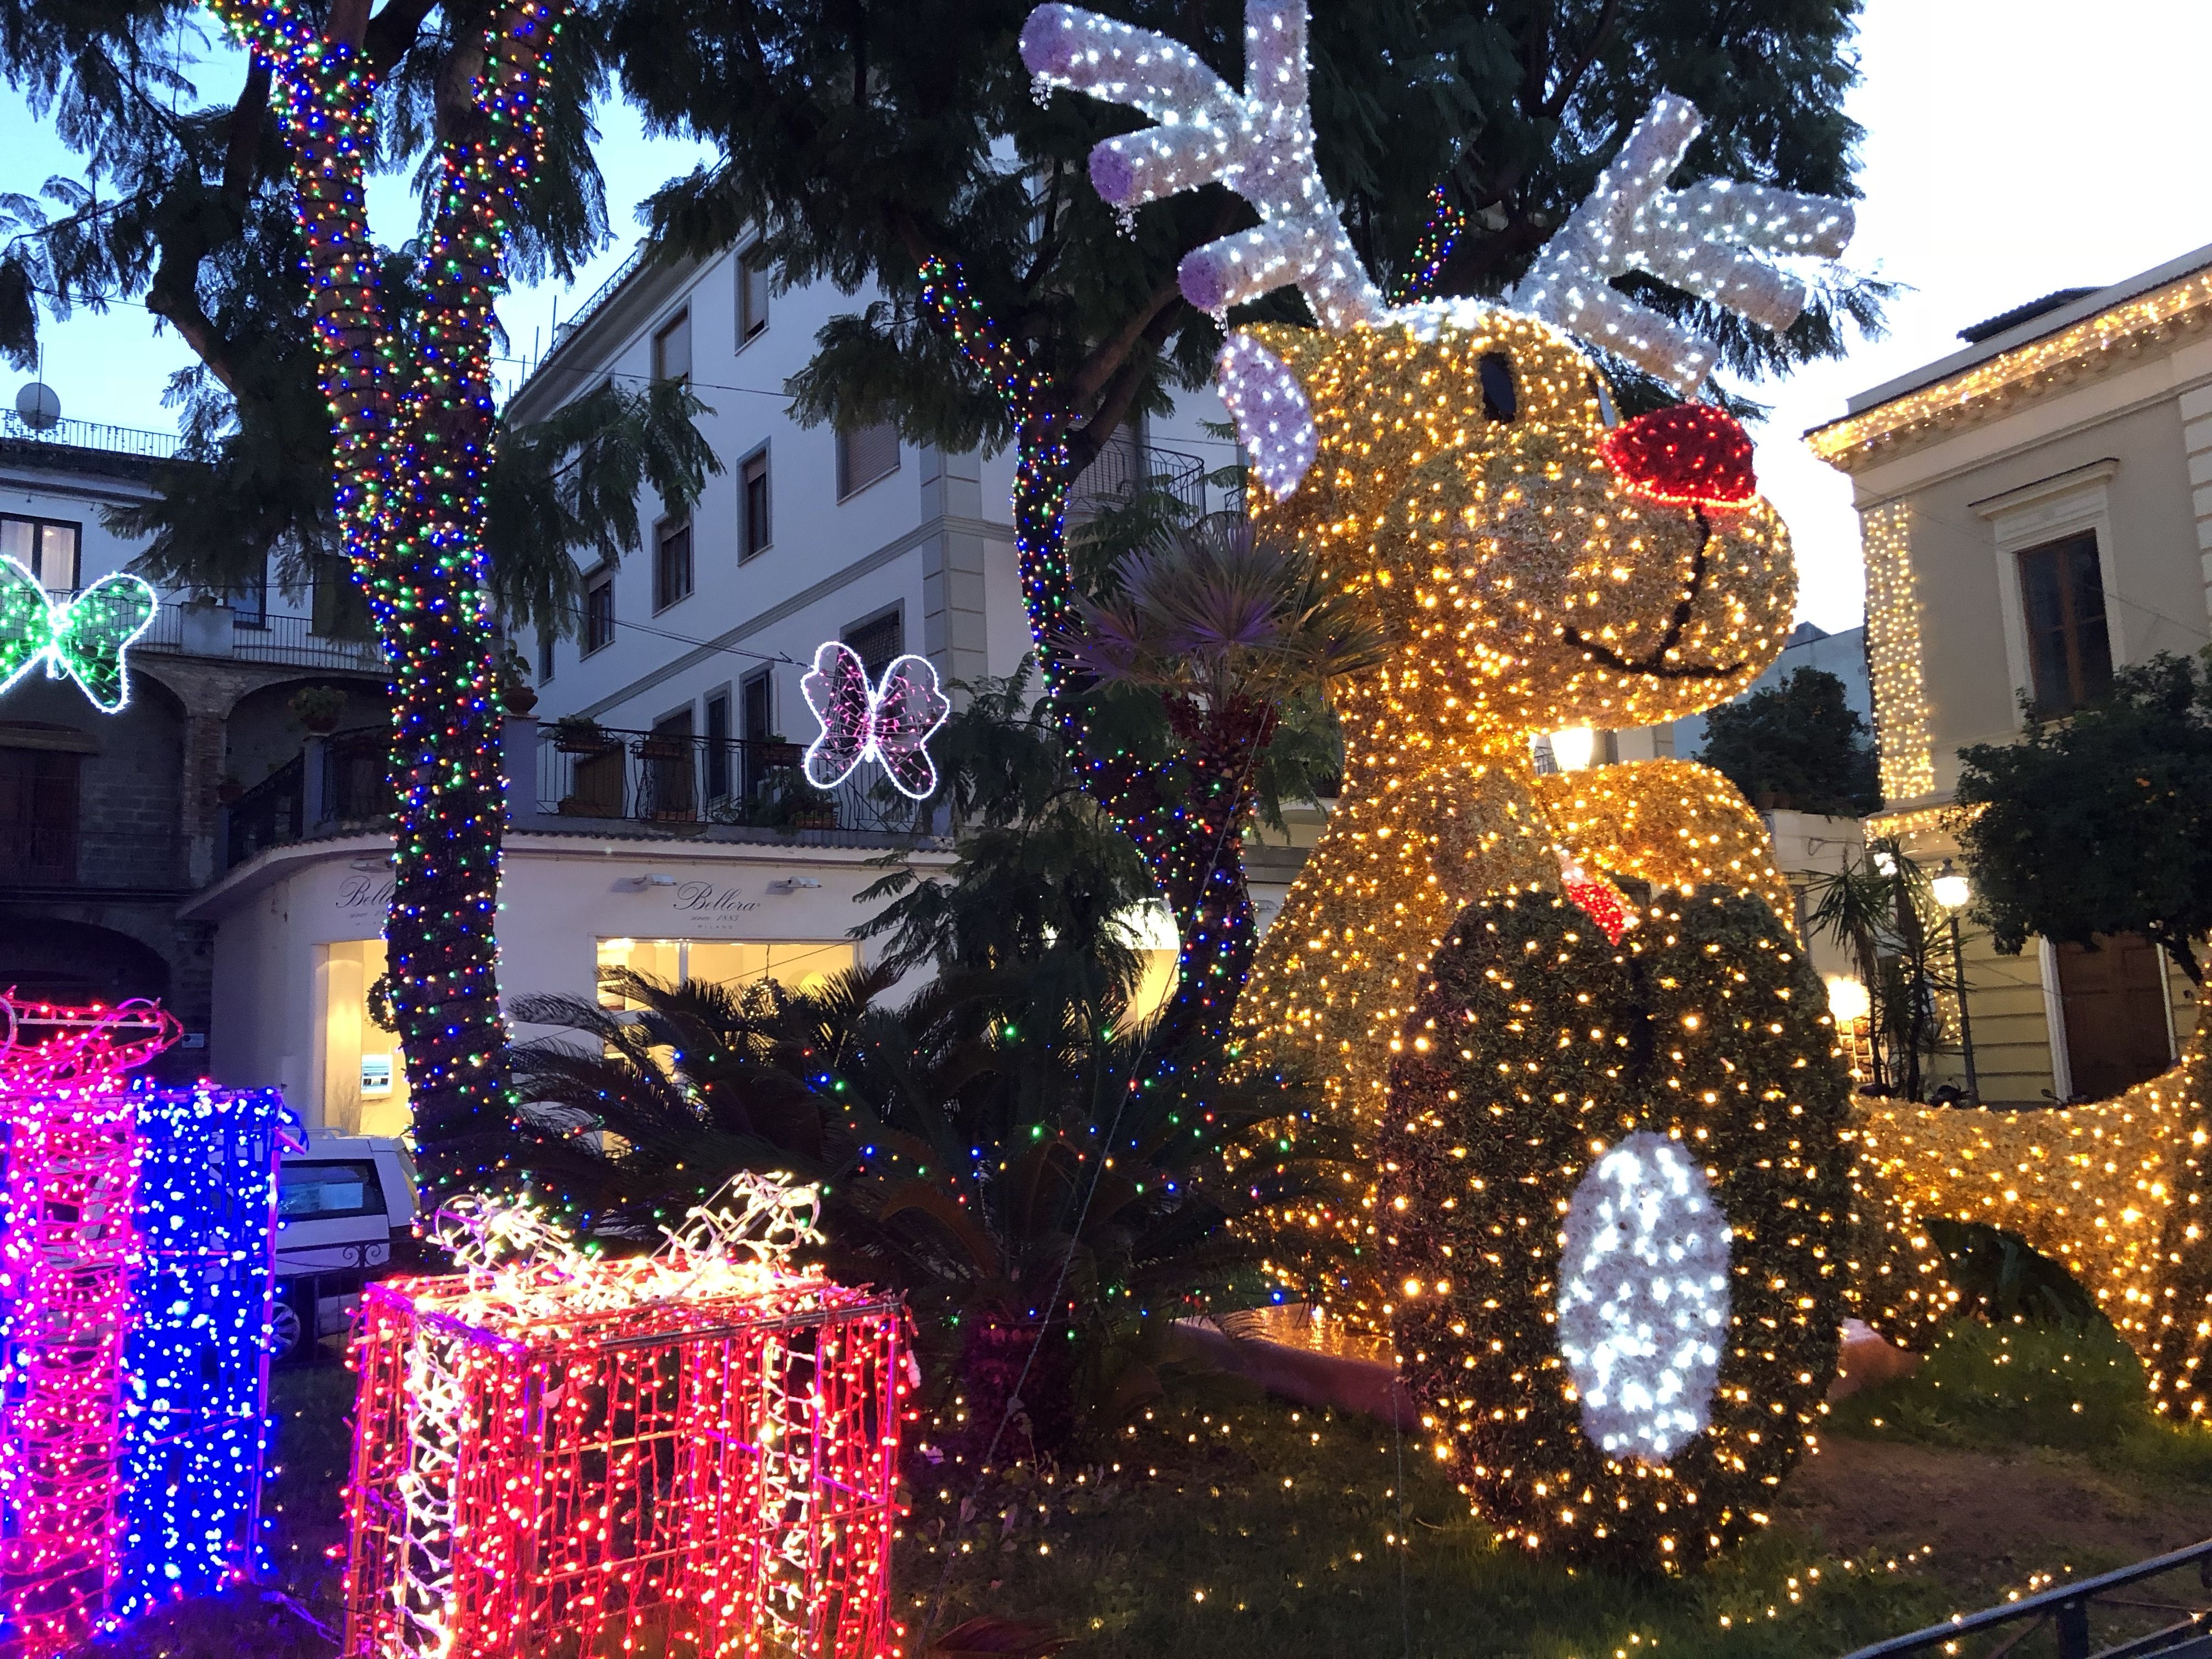 A square in the middle of Sorrento. Trees are festooned  with Christmas lights, and next to theme is a giant cartoon reindeer made of wire and Christmas lights, next to giant Christmas presents